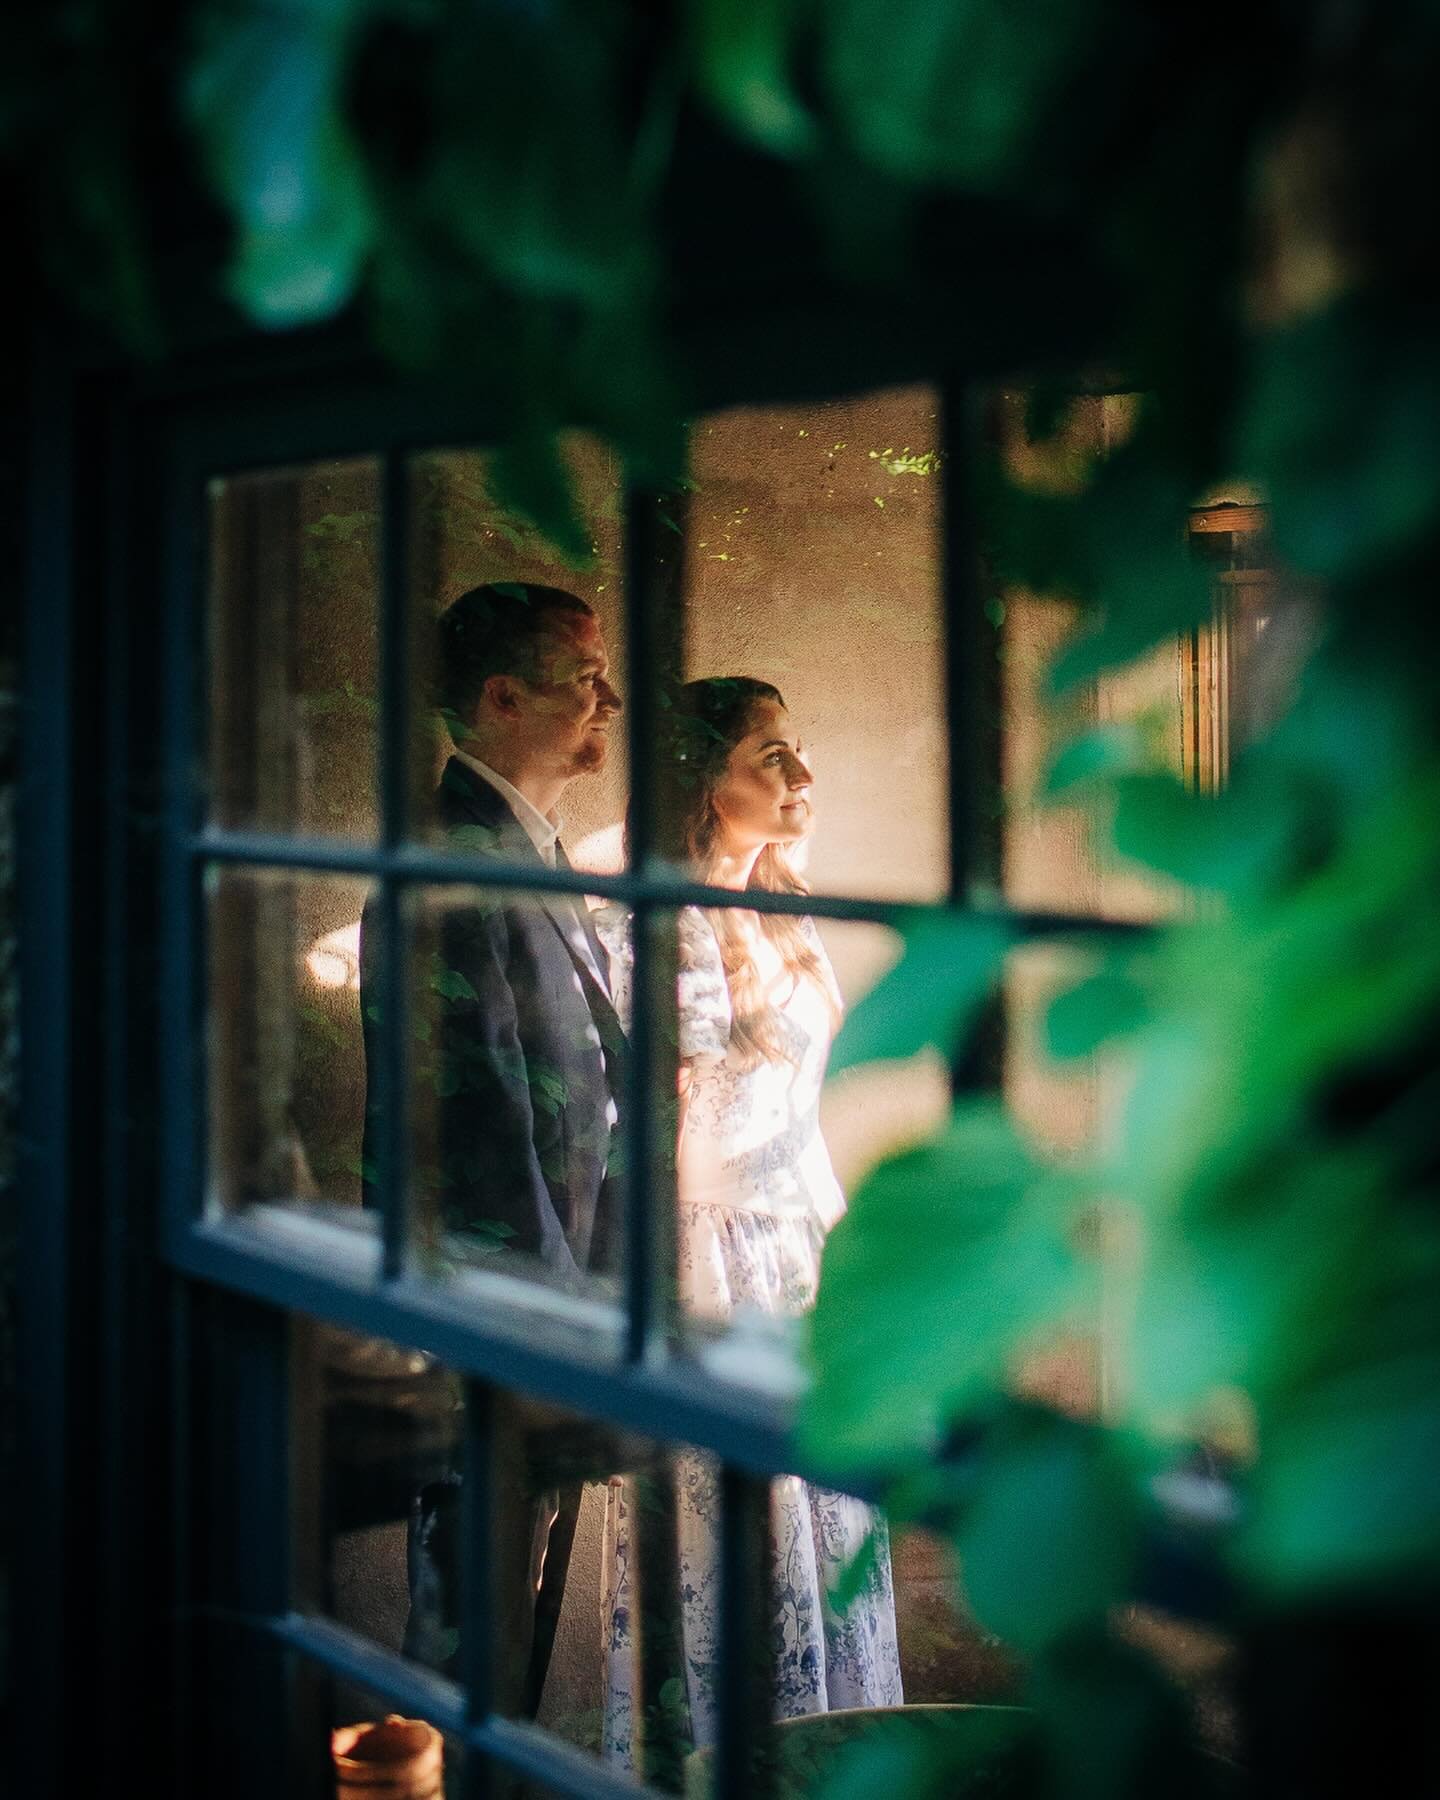 Fairytale people in fairytale places. 😍

Kelly + Liam&rsquo;s engagement session was everything light and romantic - it felt like I was reading a story shown only in pictures. 🥹

You two are a delight. I&rsquo;m so grateful for you in every possibl